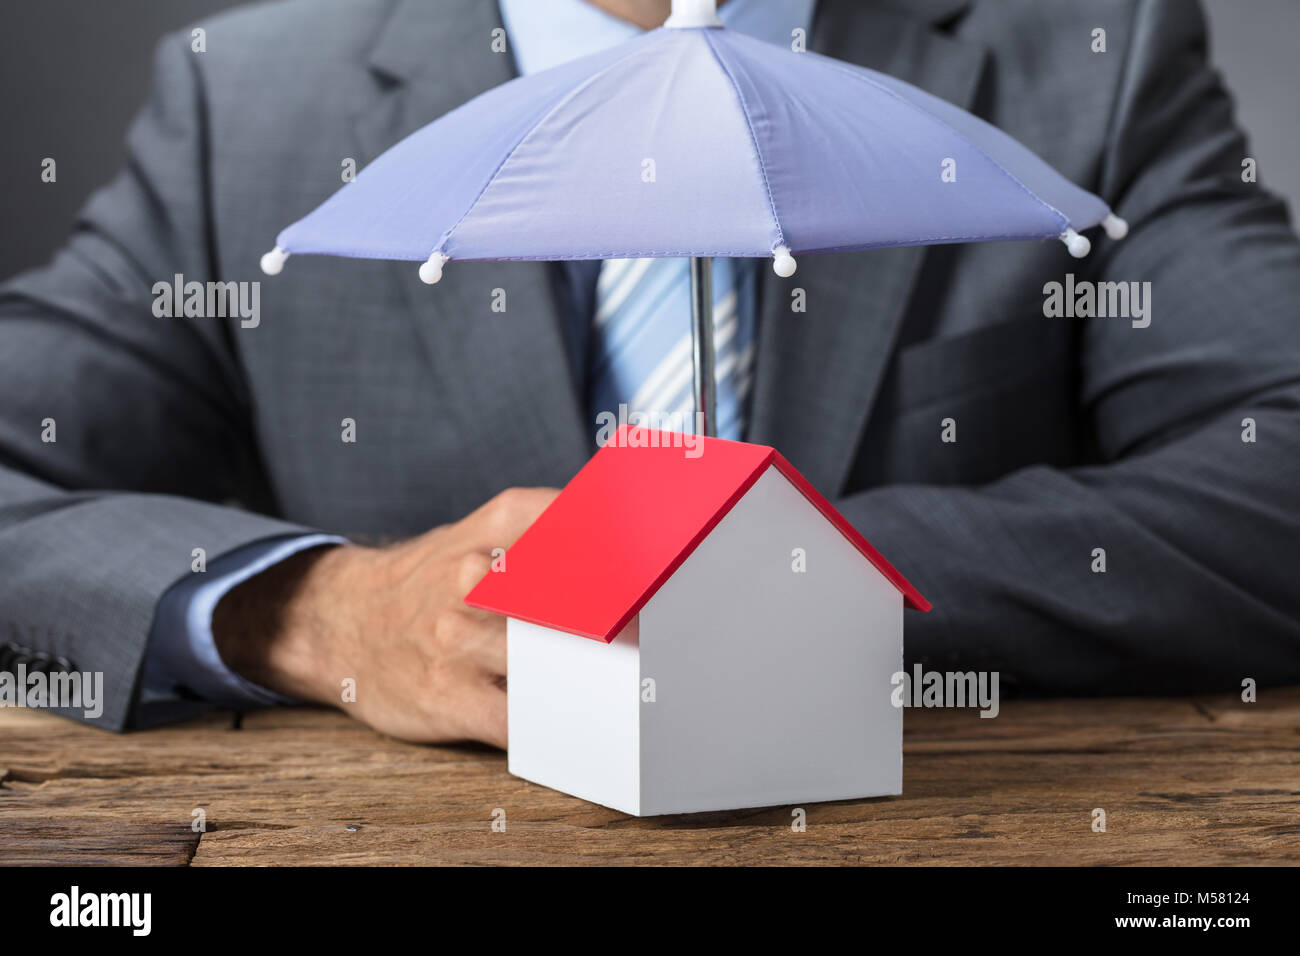 Closeup of businessman protecting house model with umbrella at table Stock Photo